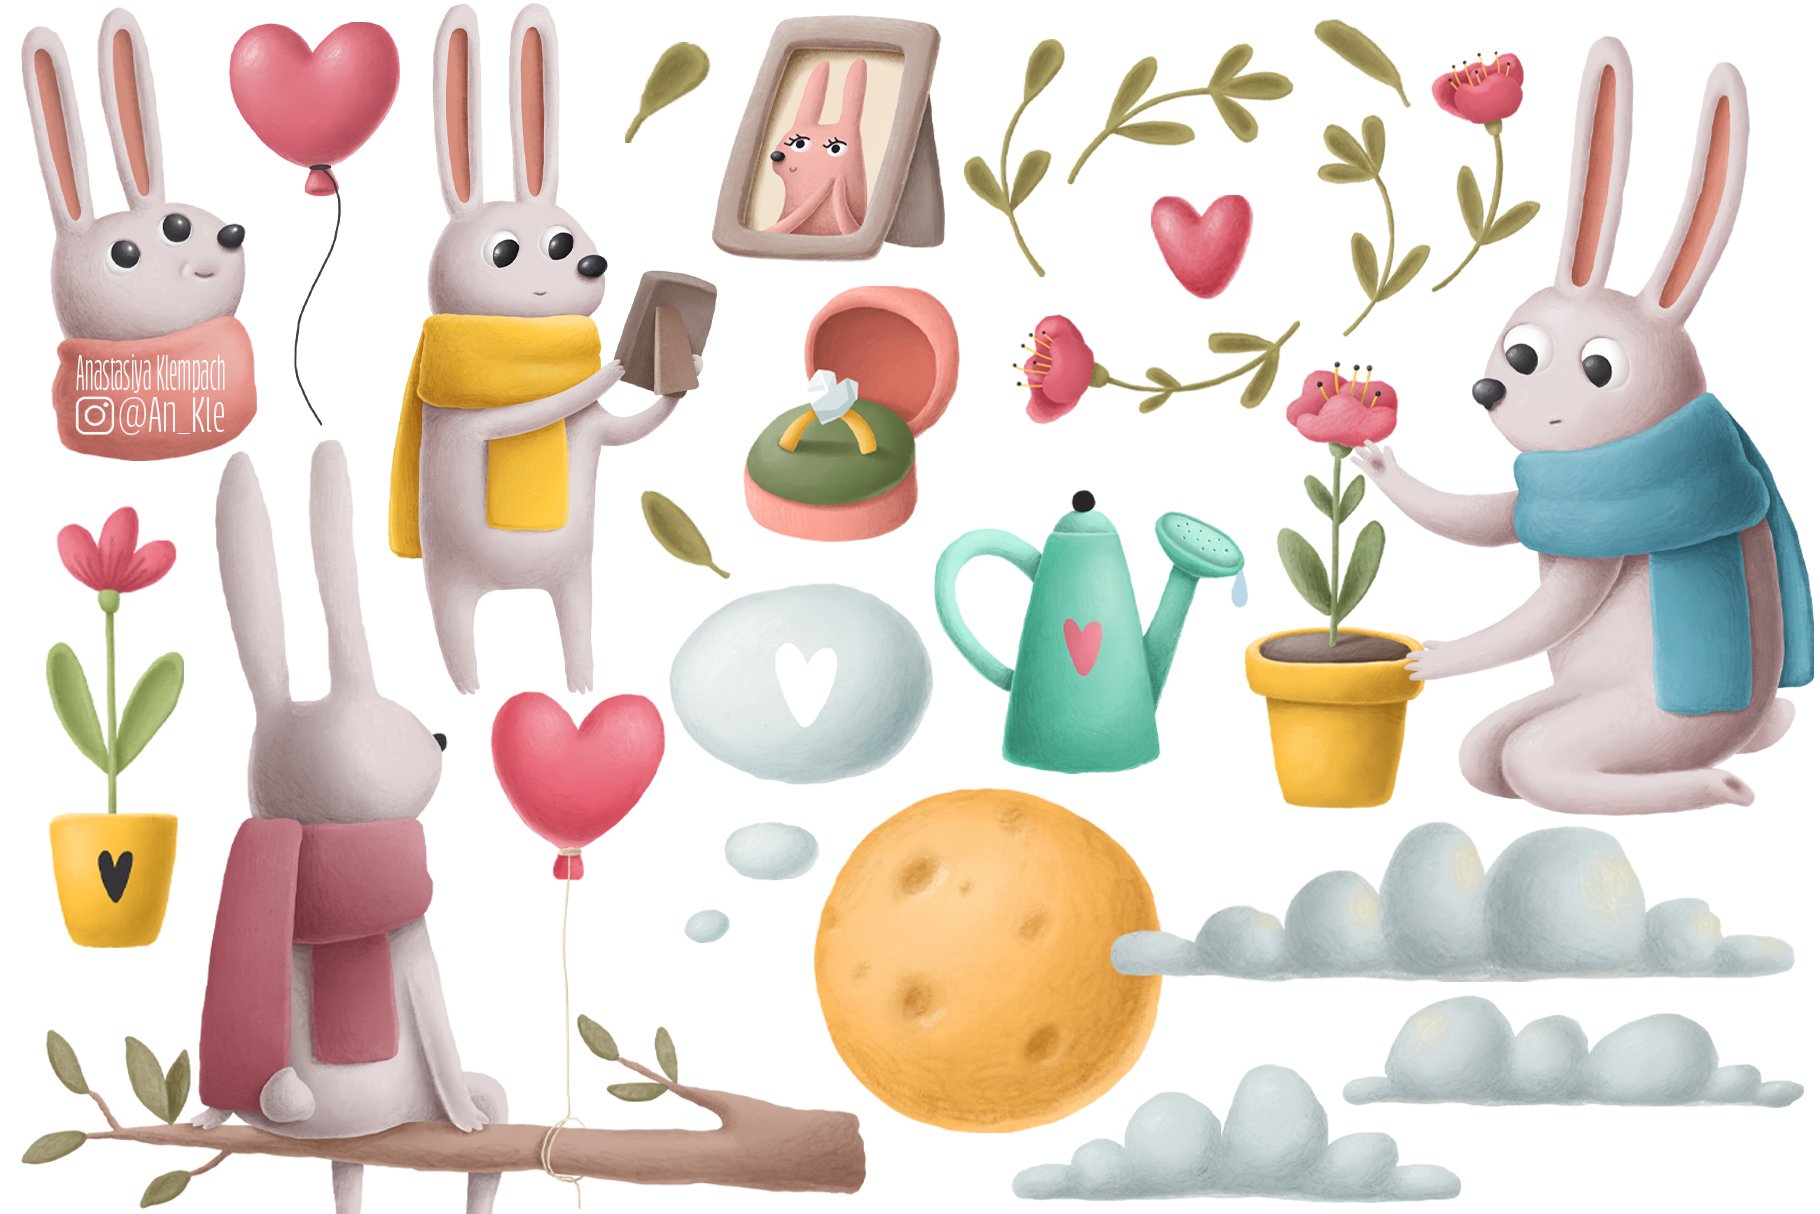 Separate elements to create an illustration with rabbit is fall in love.